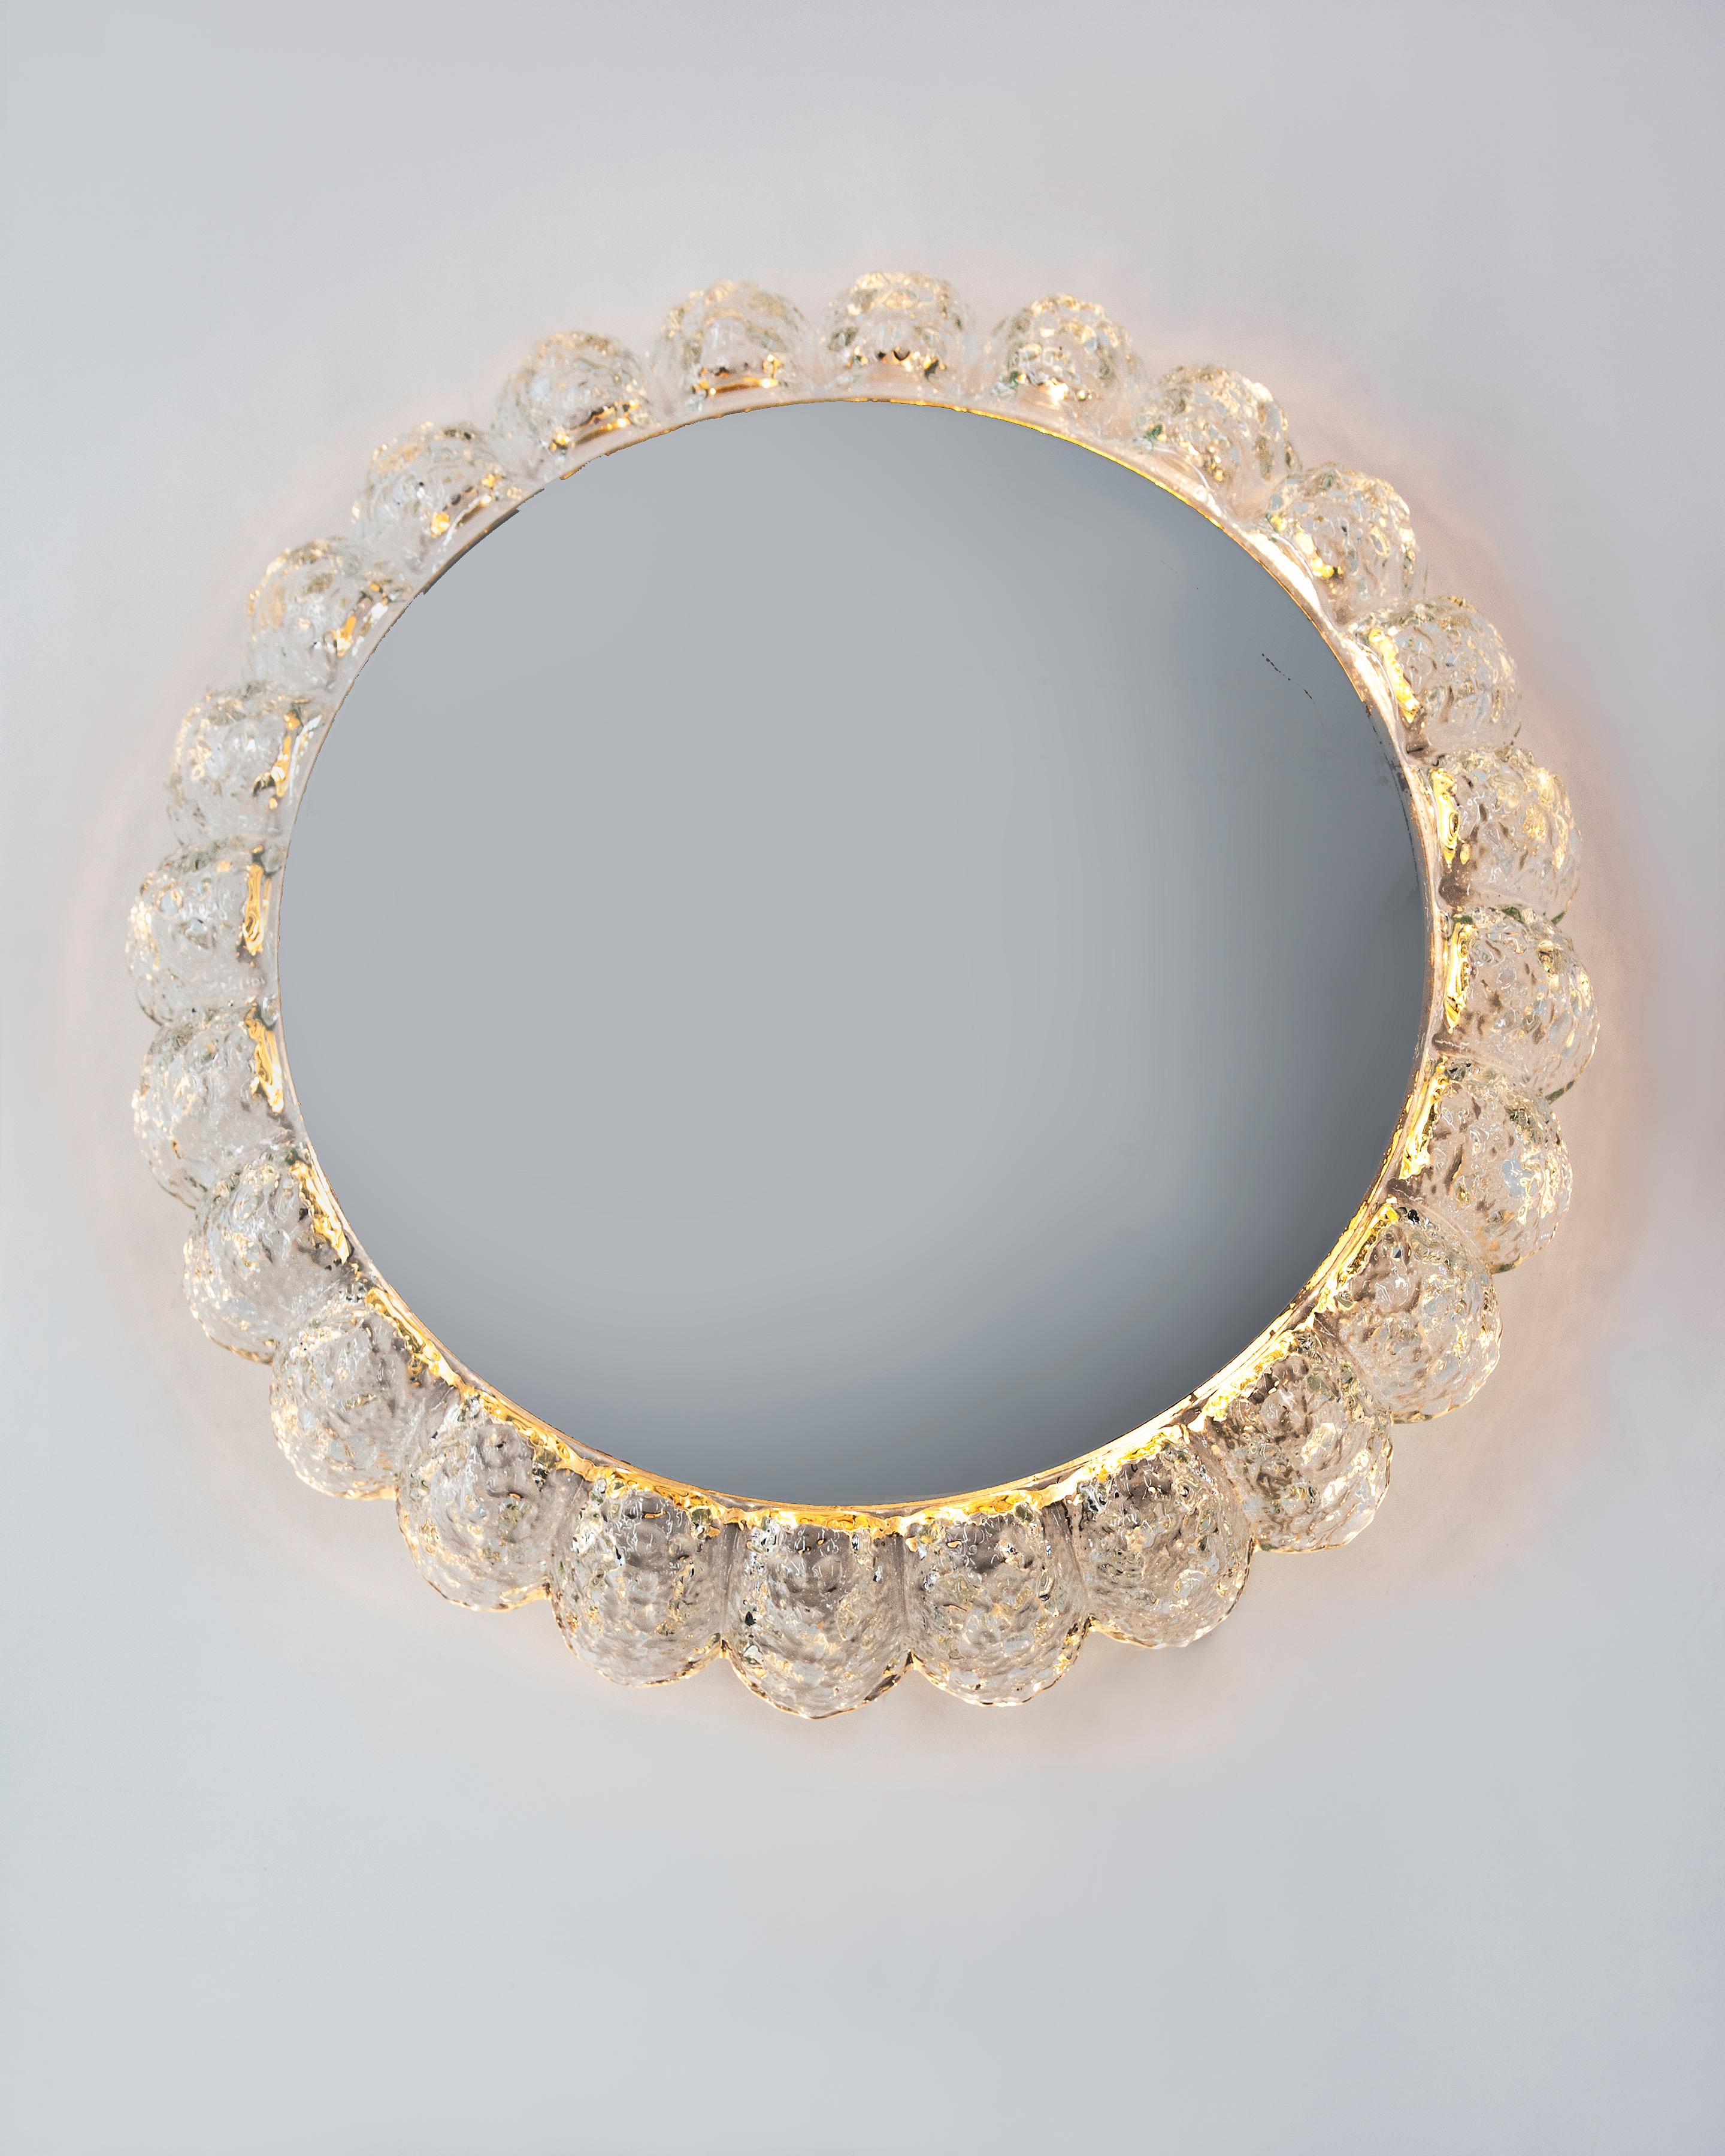 AMR1062

Circa 1960.
A vintage round illuminated mirror with clear textured glass framing the mirror, all on brushed steel fittings. Signed by the German maker Limburg. Due to the antique nature of this fixture, there are some nicks or imperfections